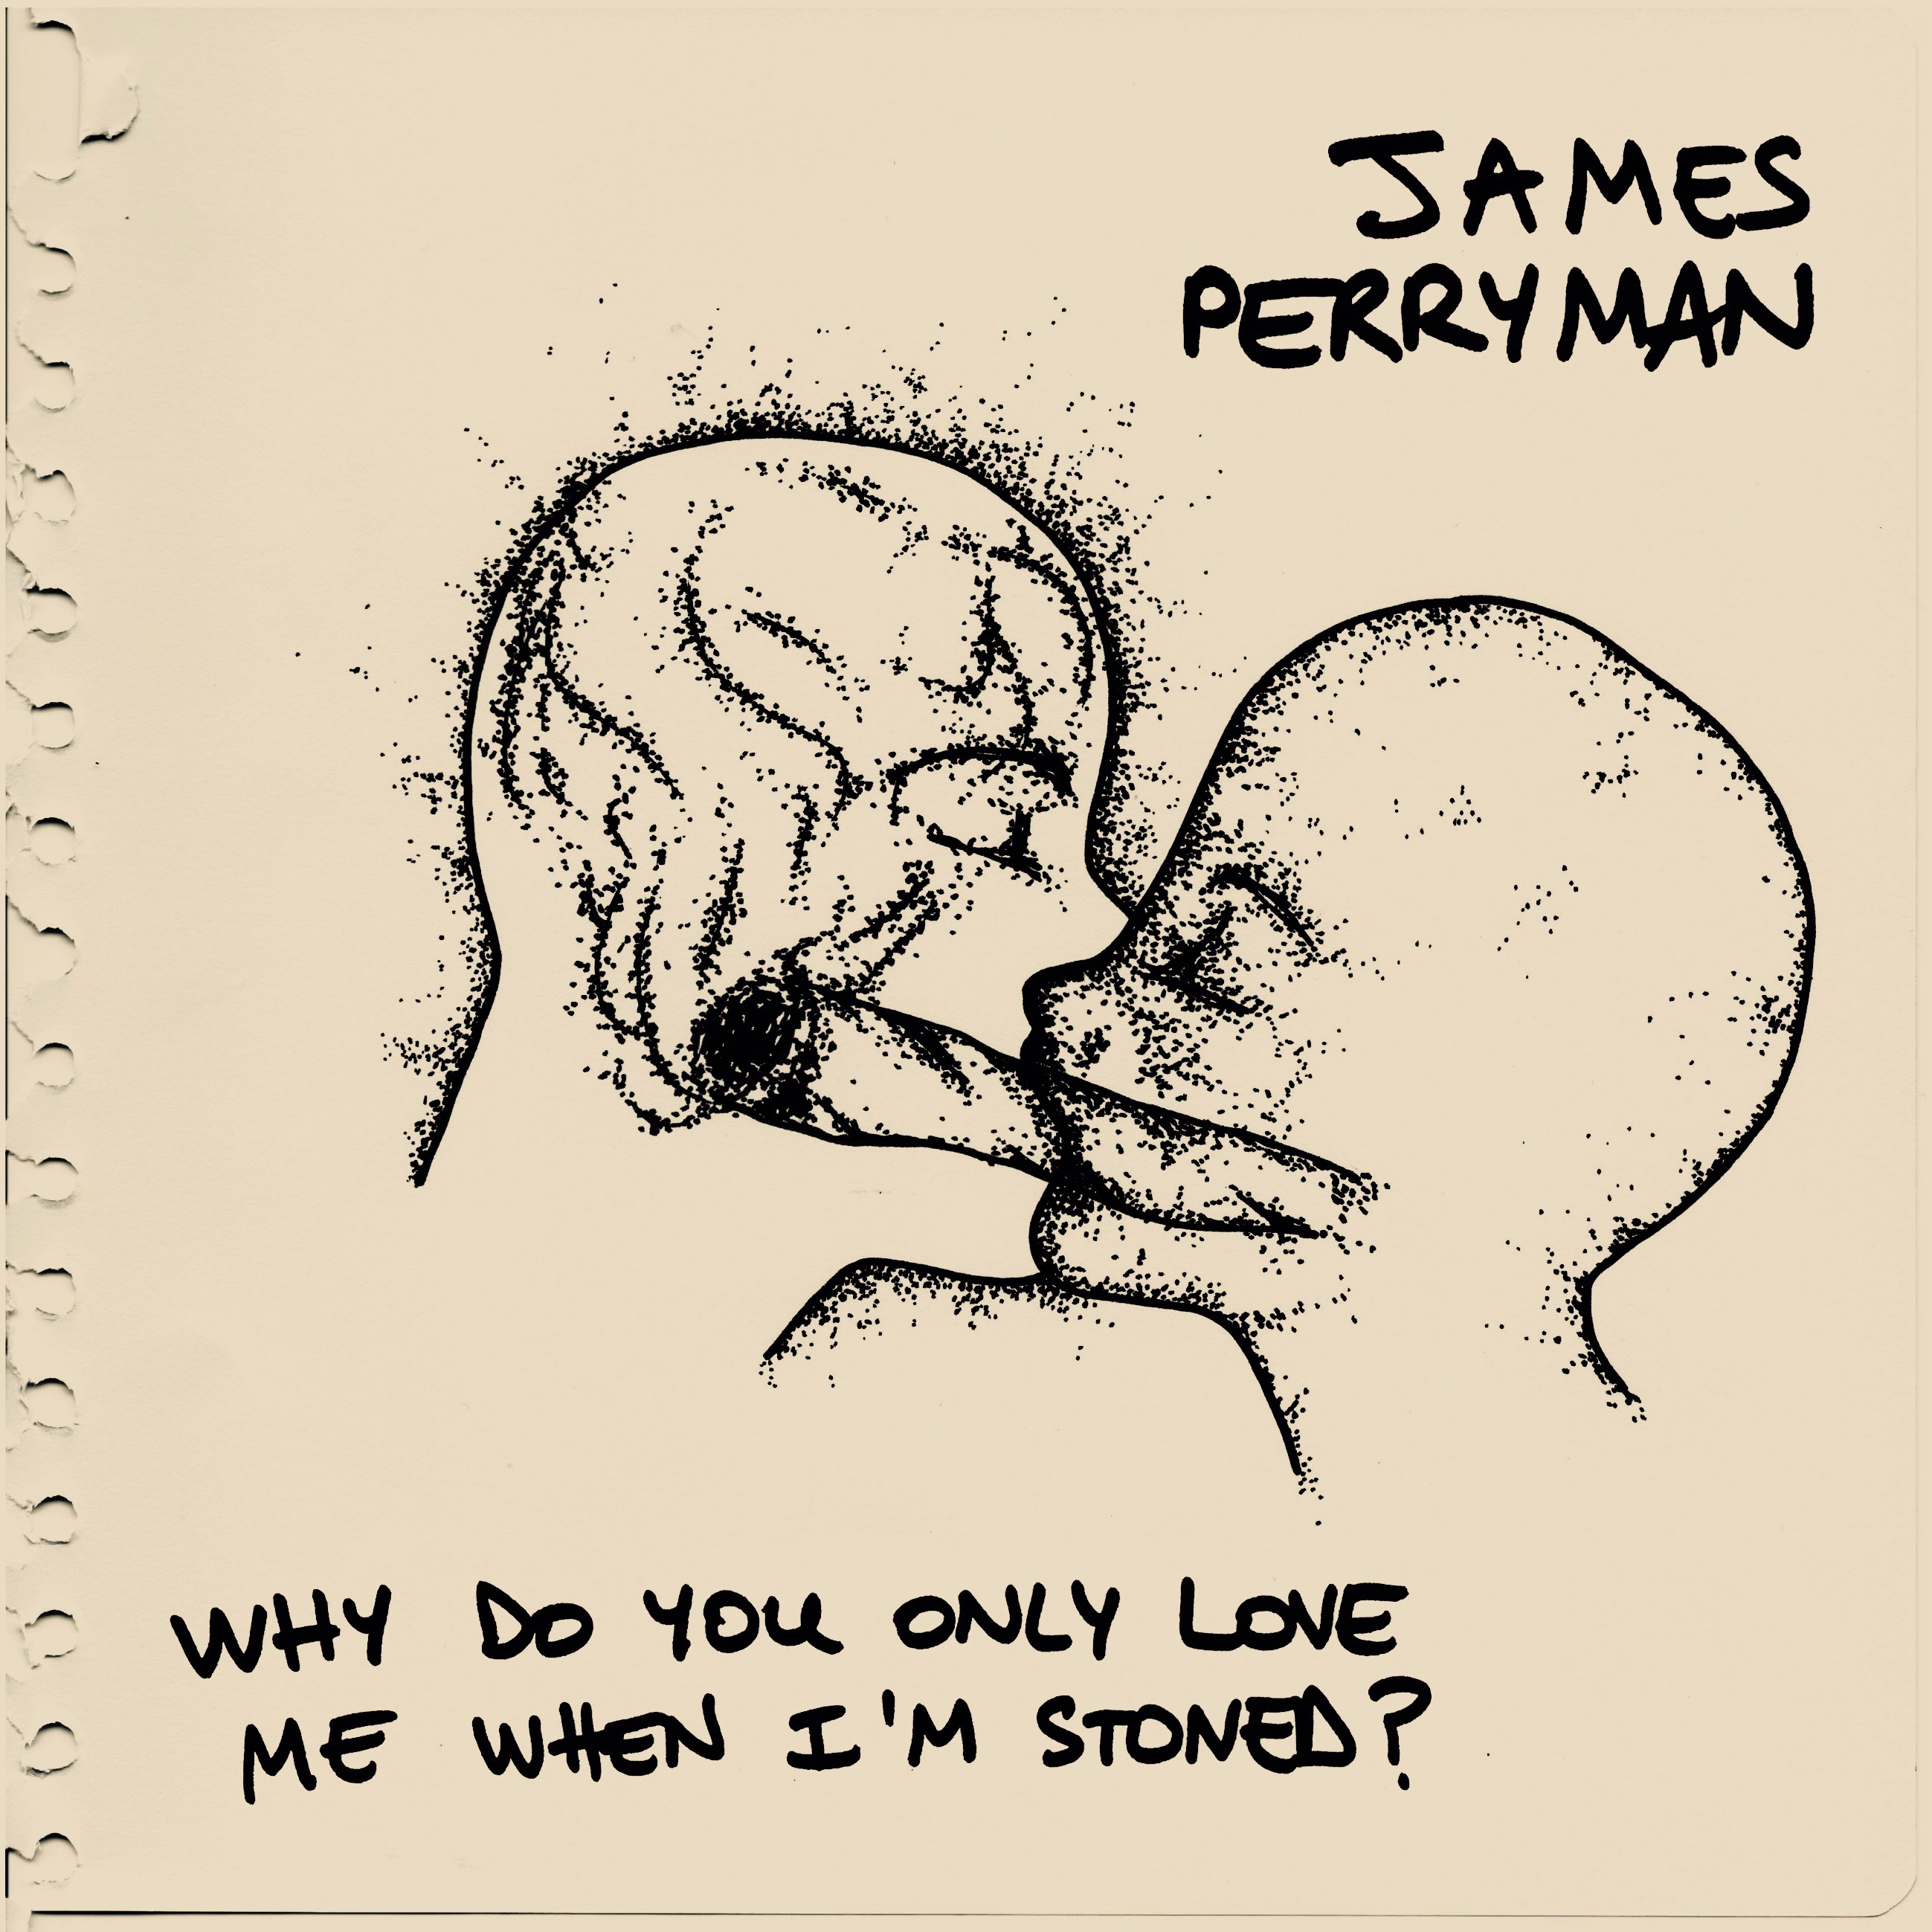 James Perryman - Why Do You Only Love Me When I’m Stoned?